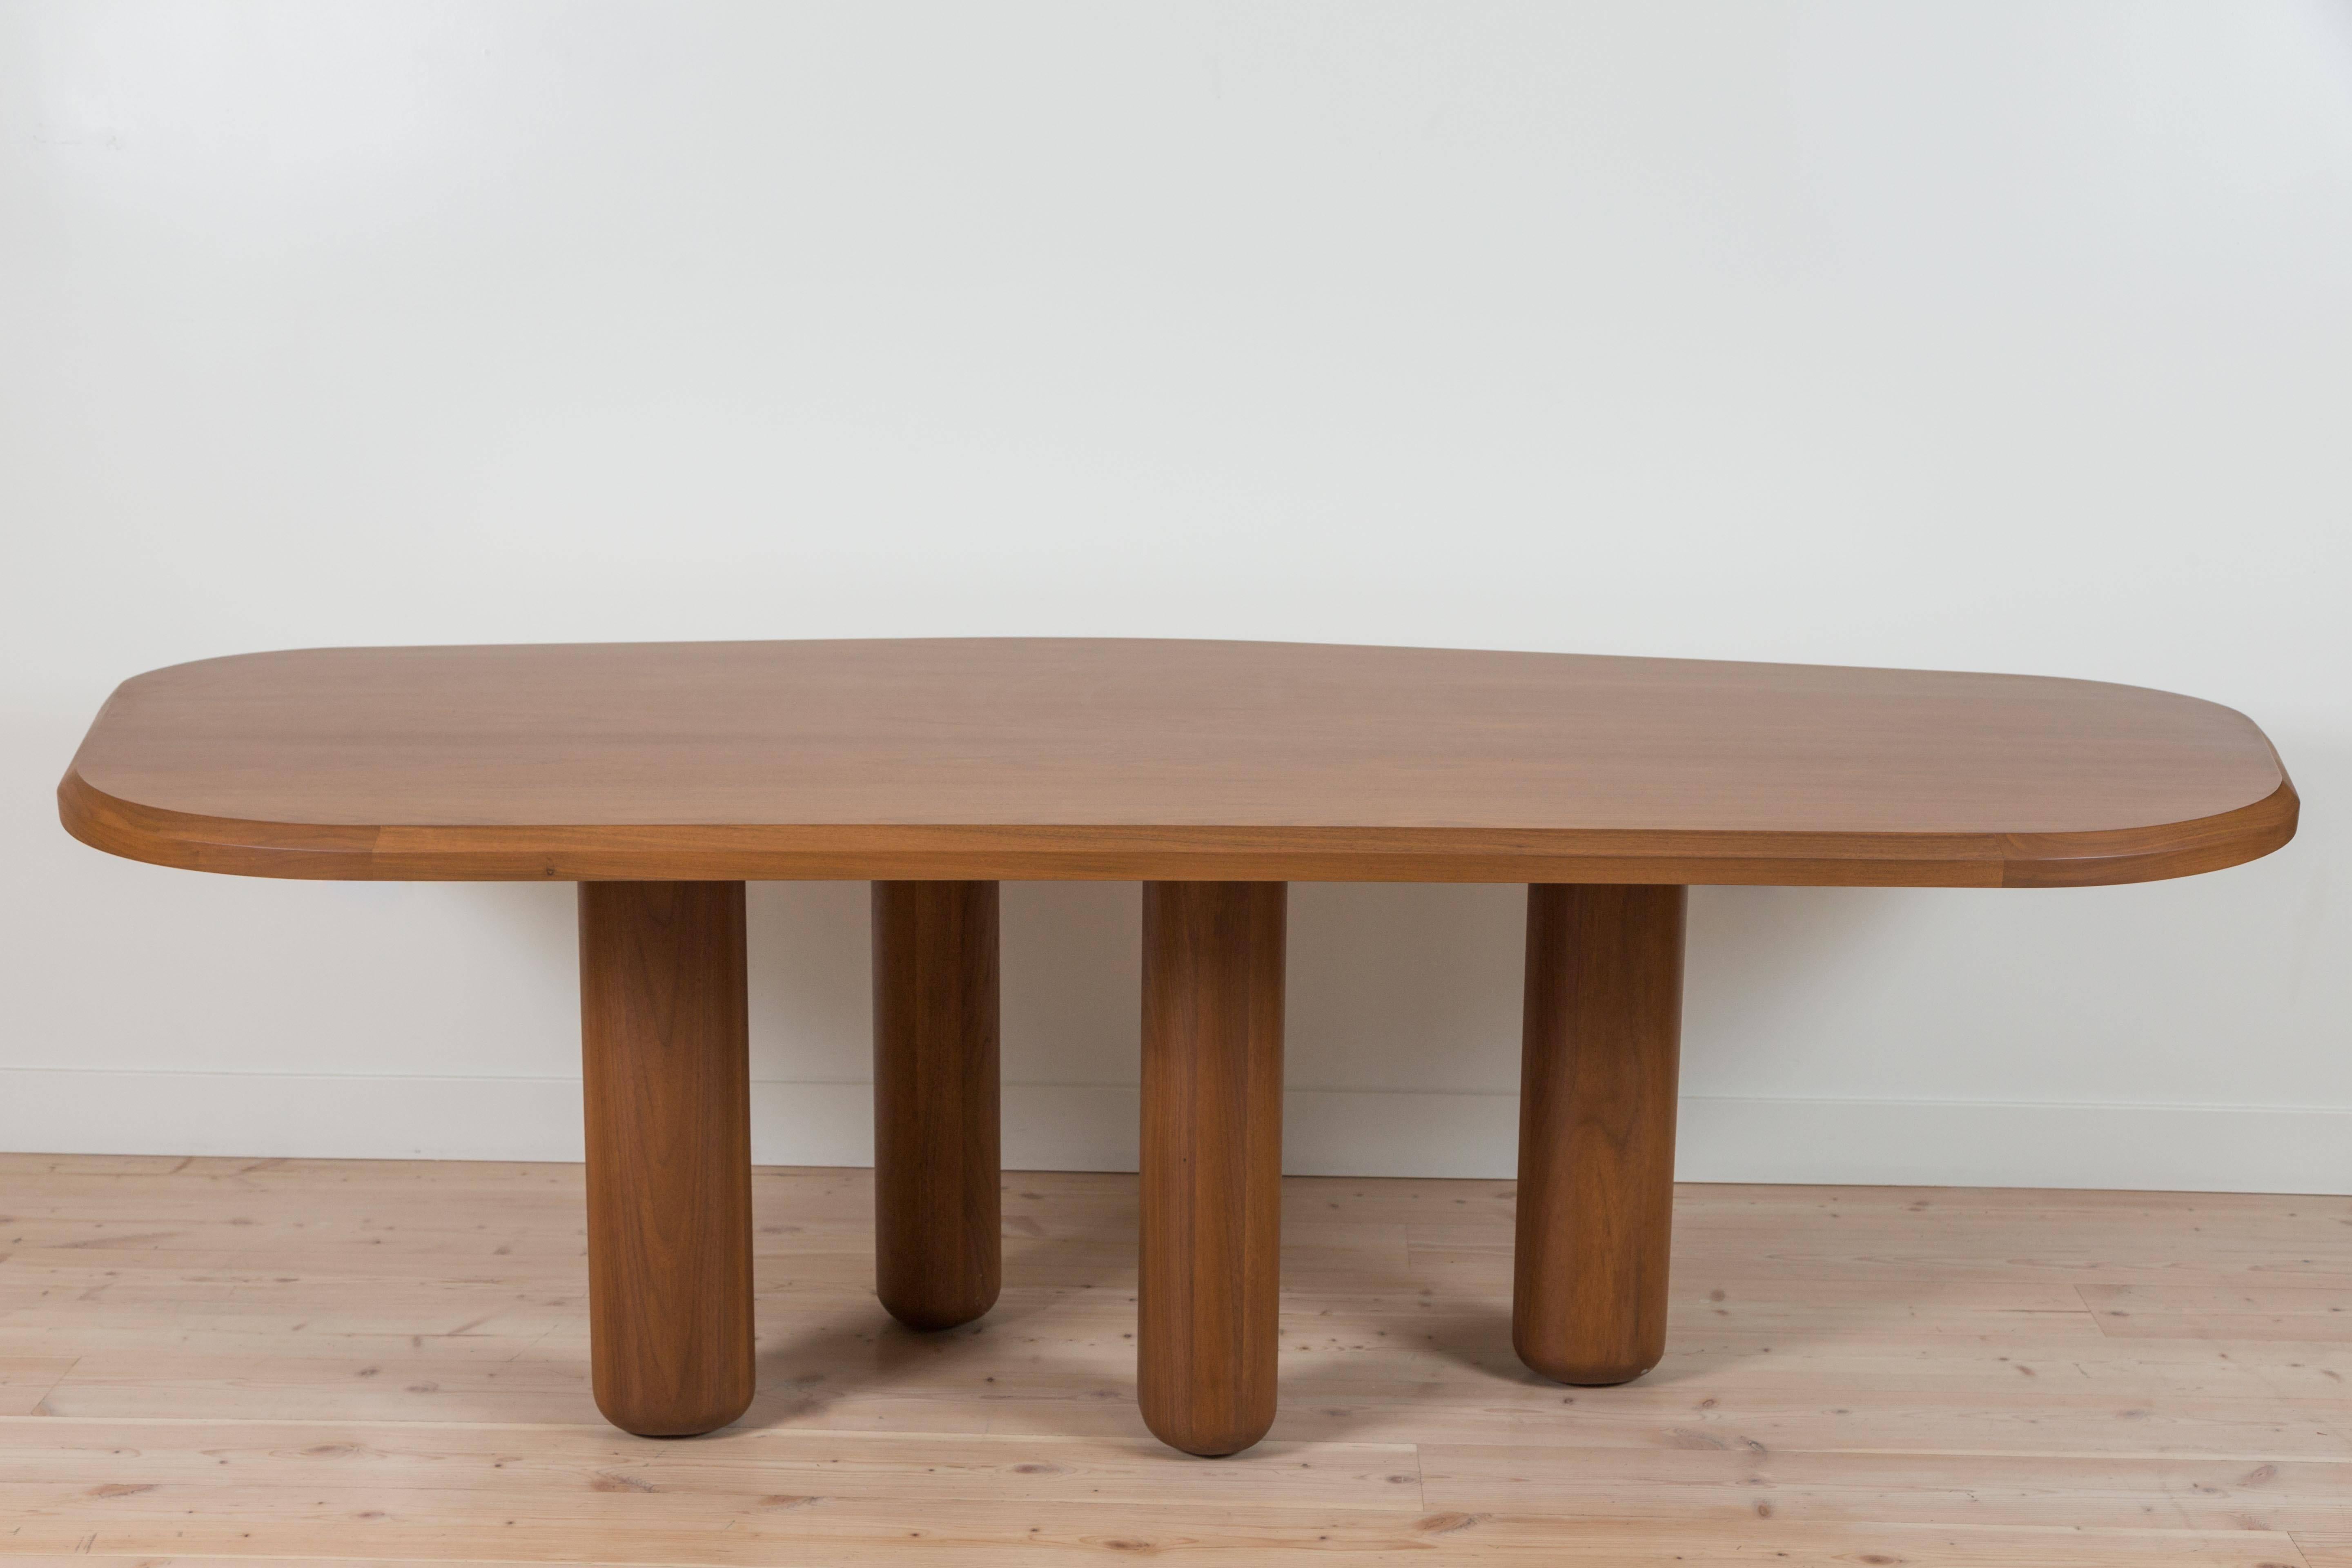 Walnut Rough Dining Table by Collection Particulière for Lawson-Fenning